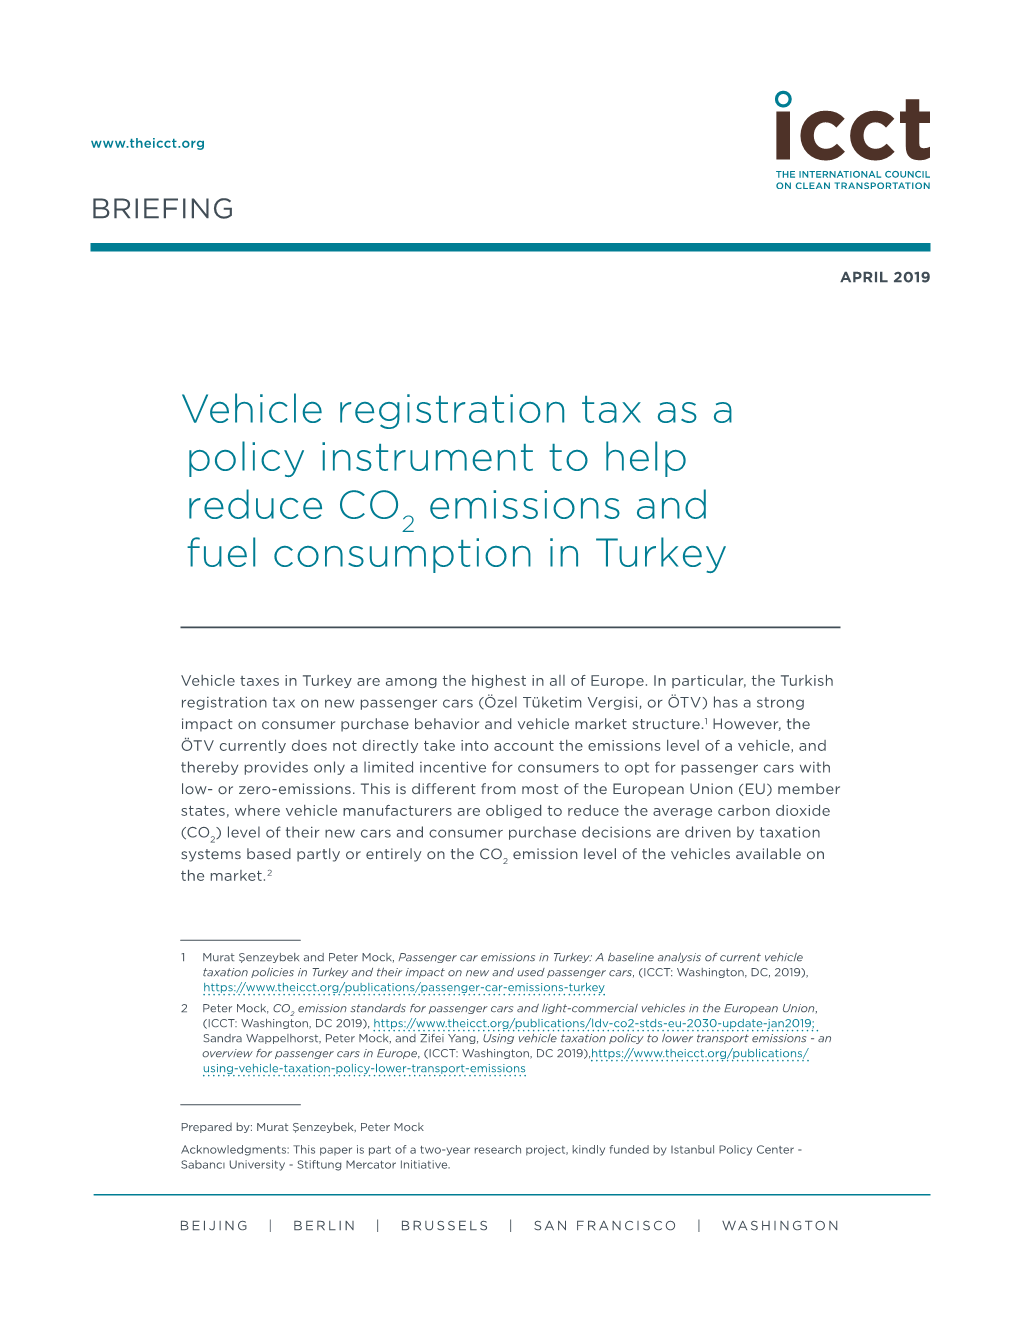 Vehicle Registration Tax As a Policy Instrument to Help Reduce CO2